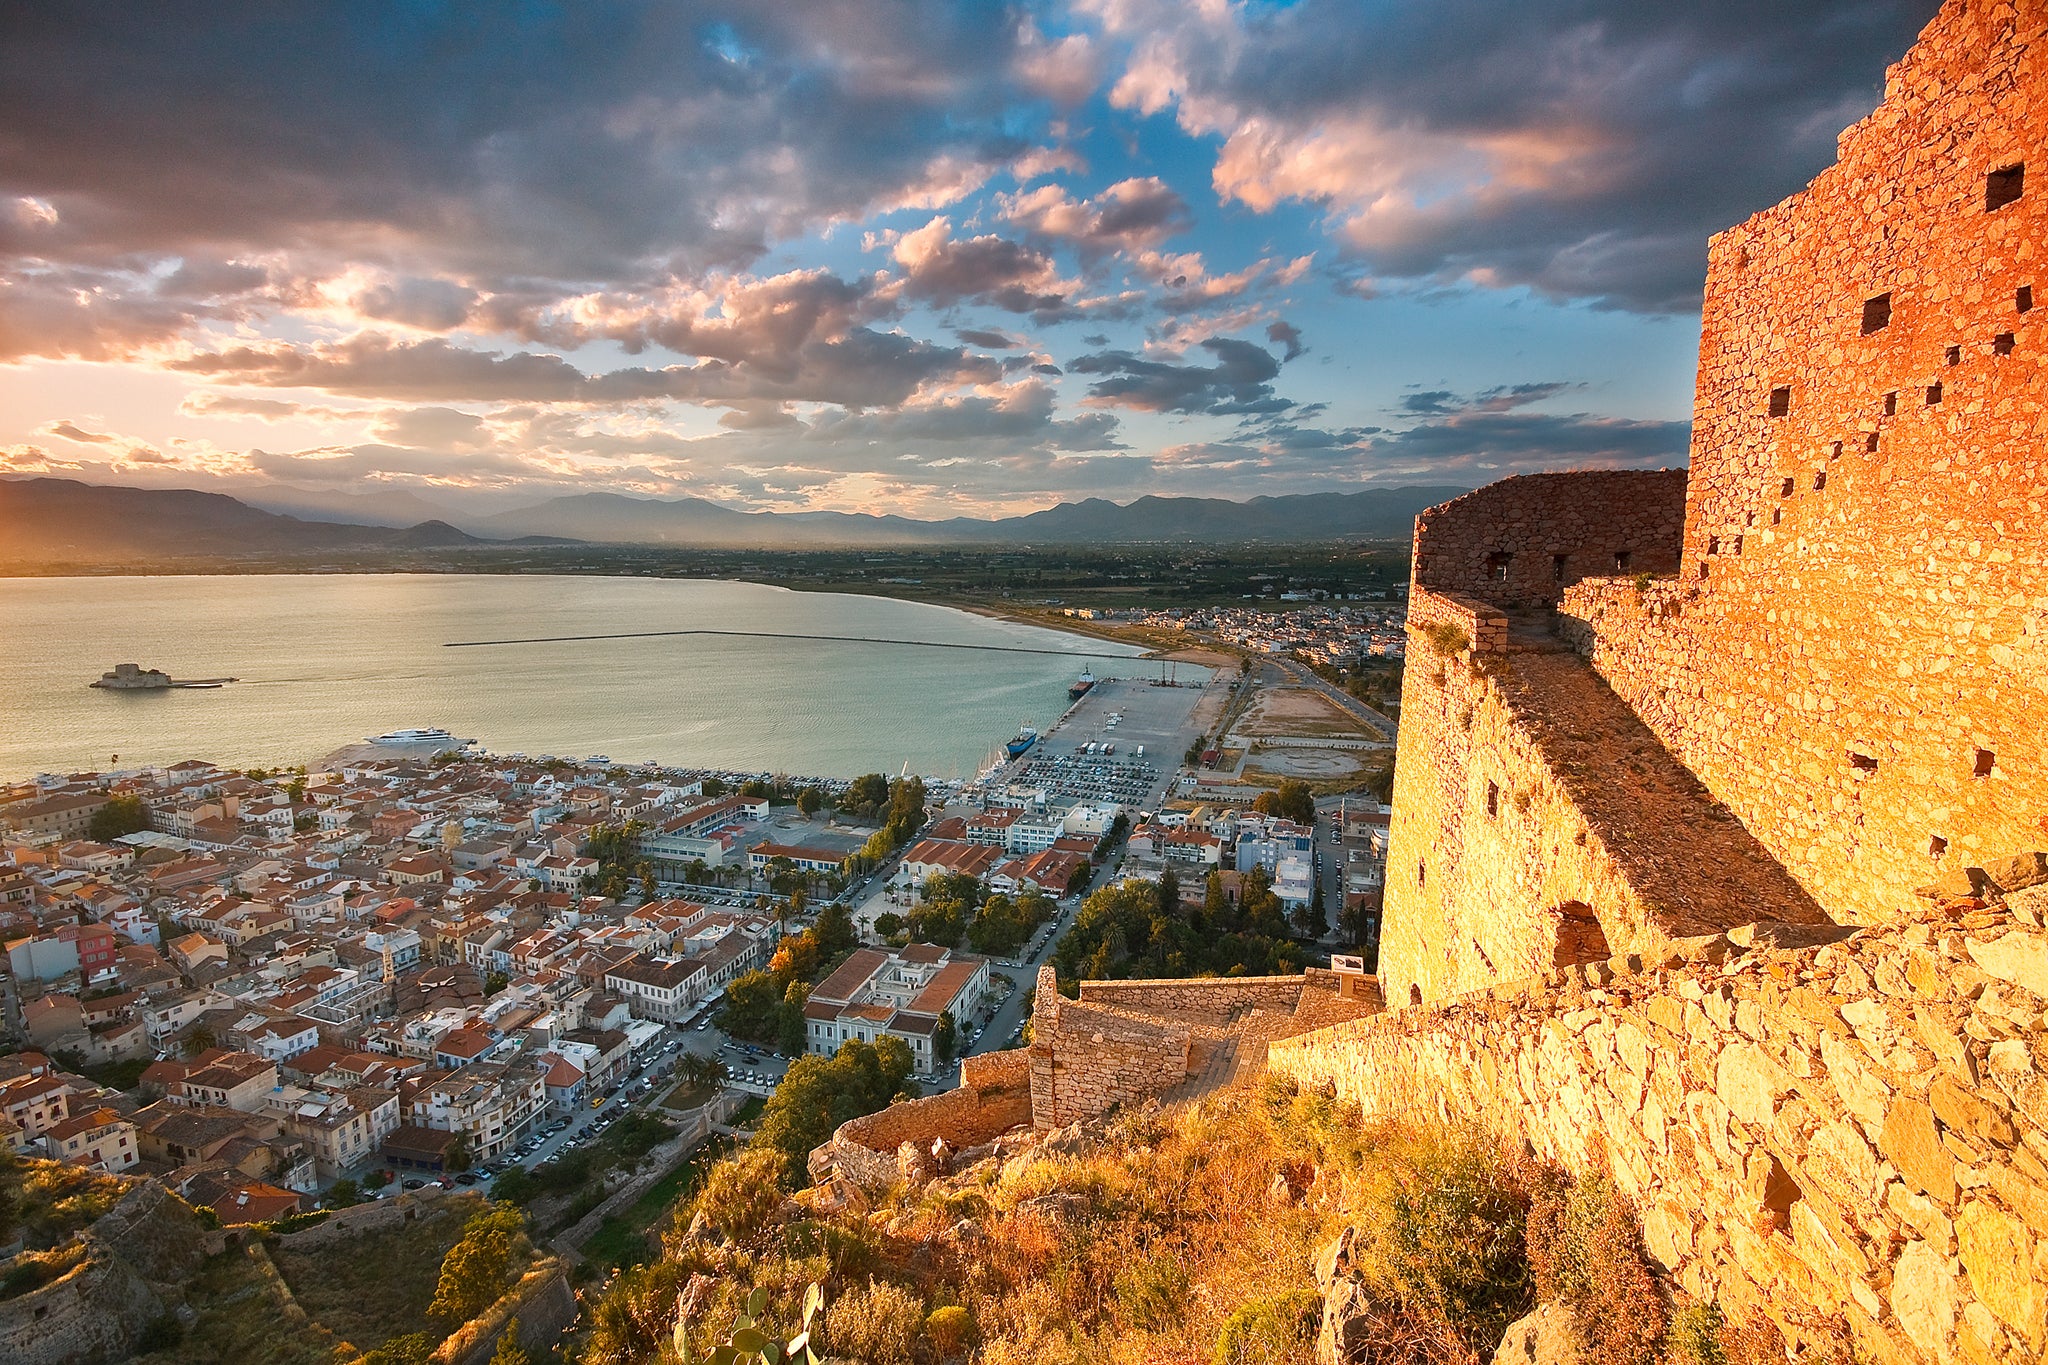 The port town of Nafplio makes a fine base from which to explore the Peloponnese